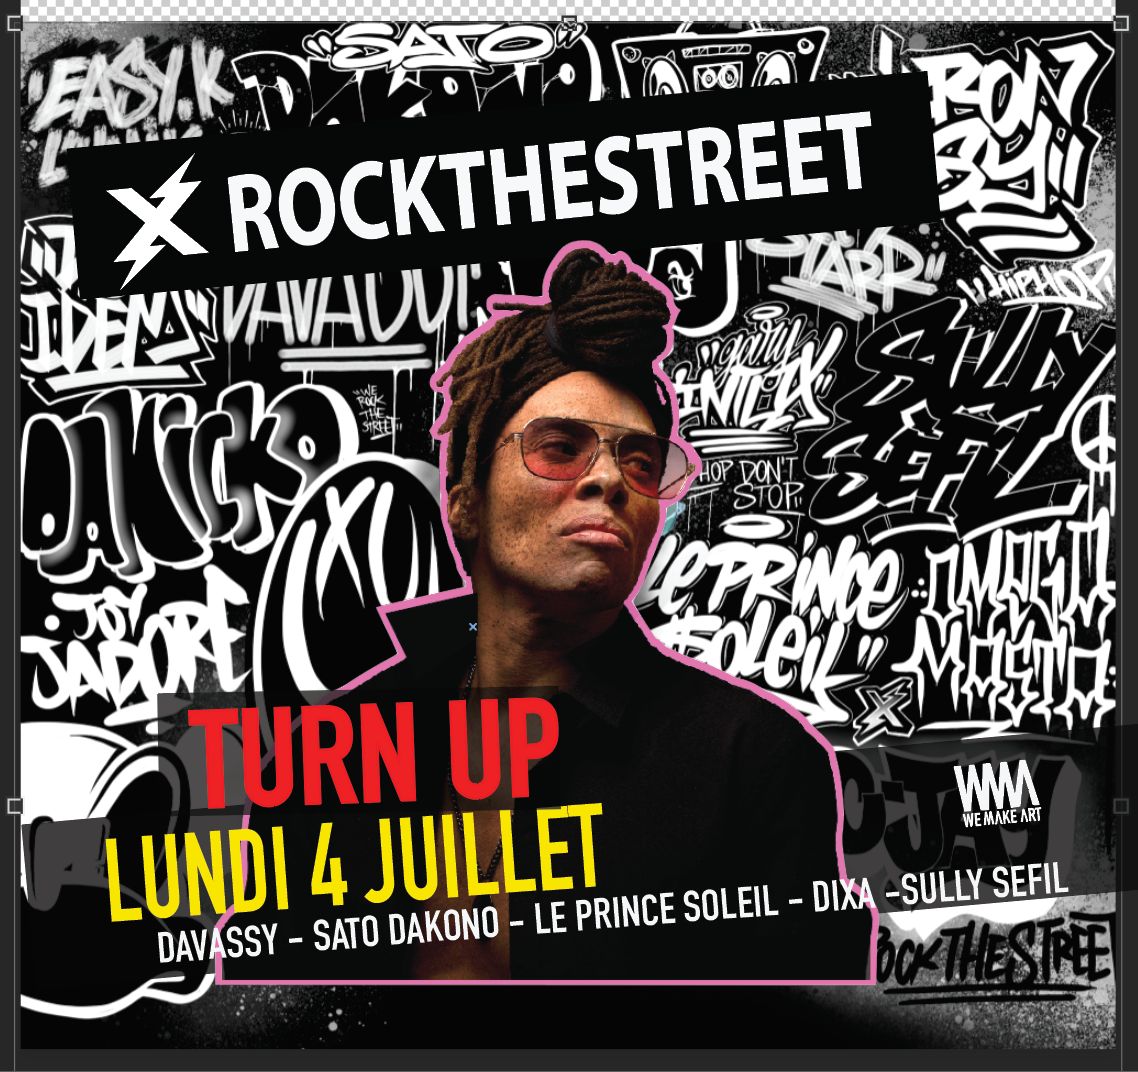 ROCKTHESTREET - TURN UP Party !!!